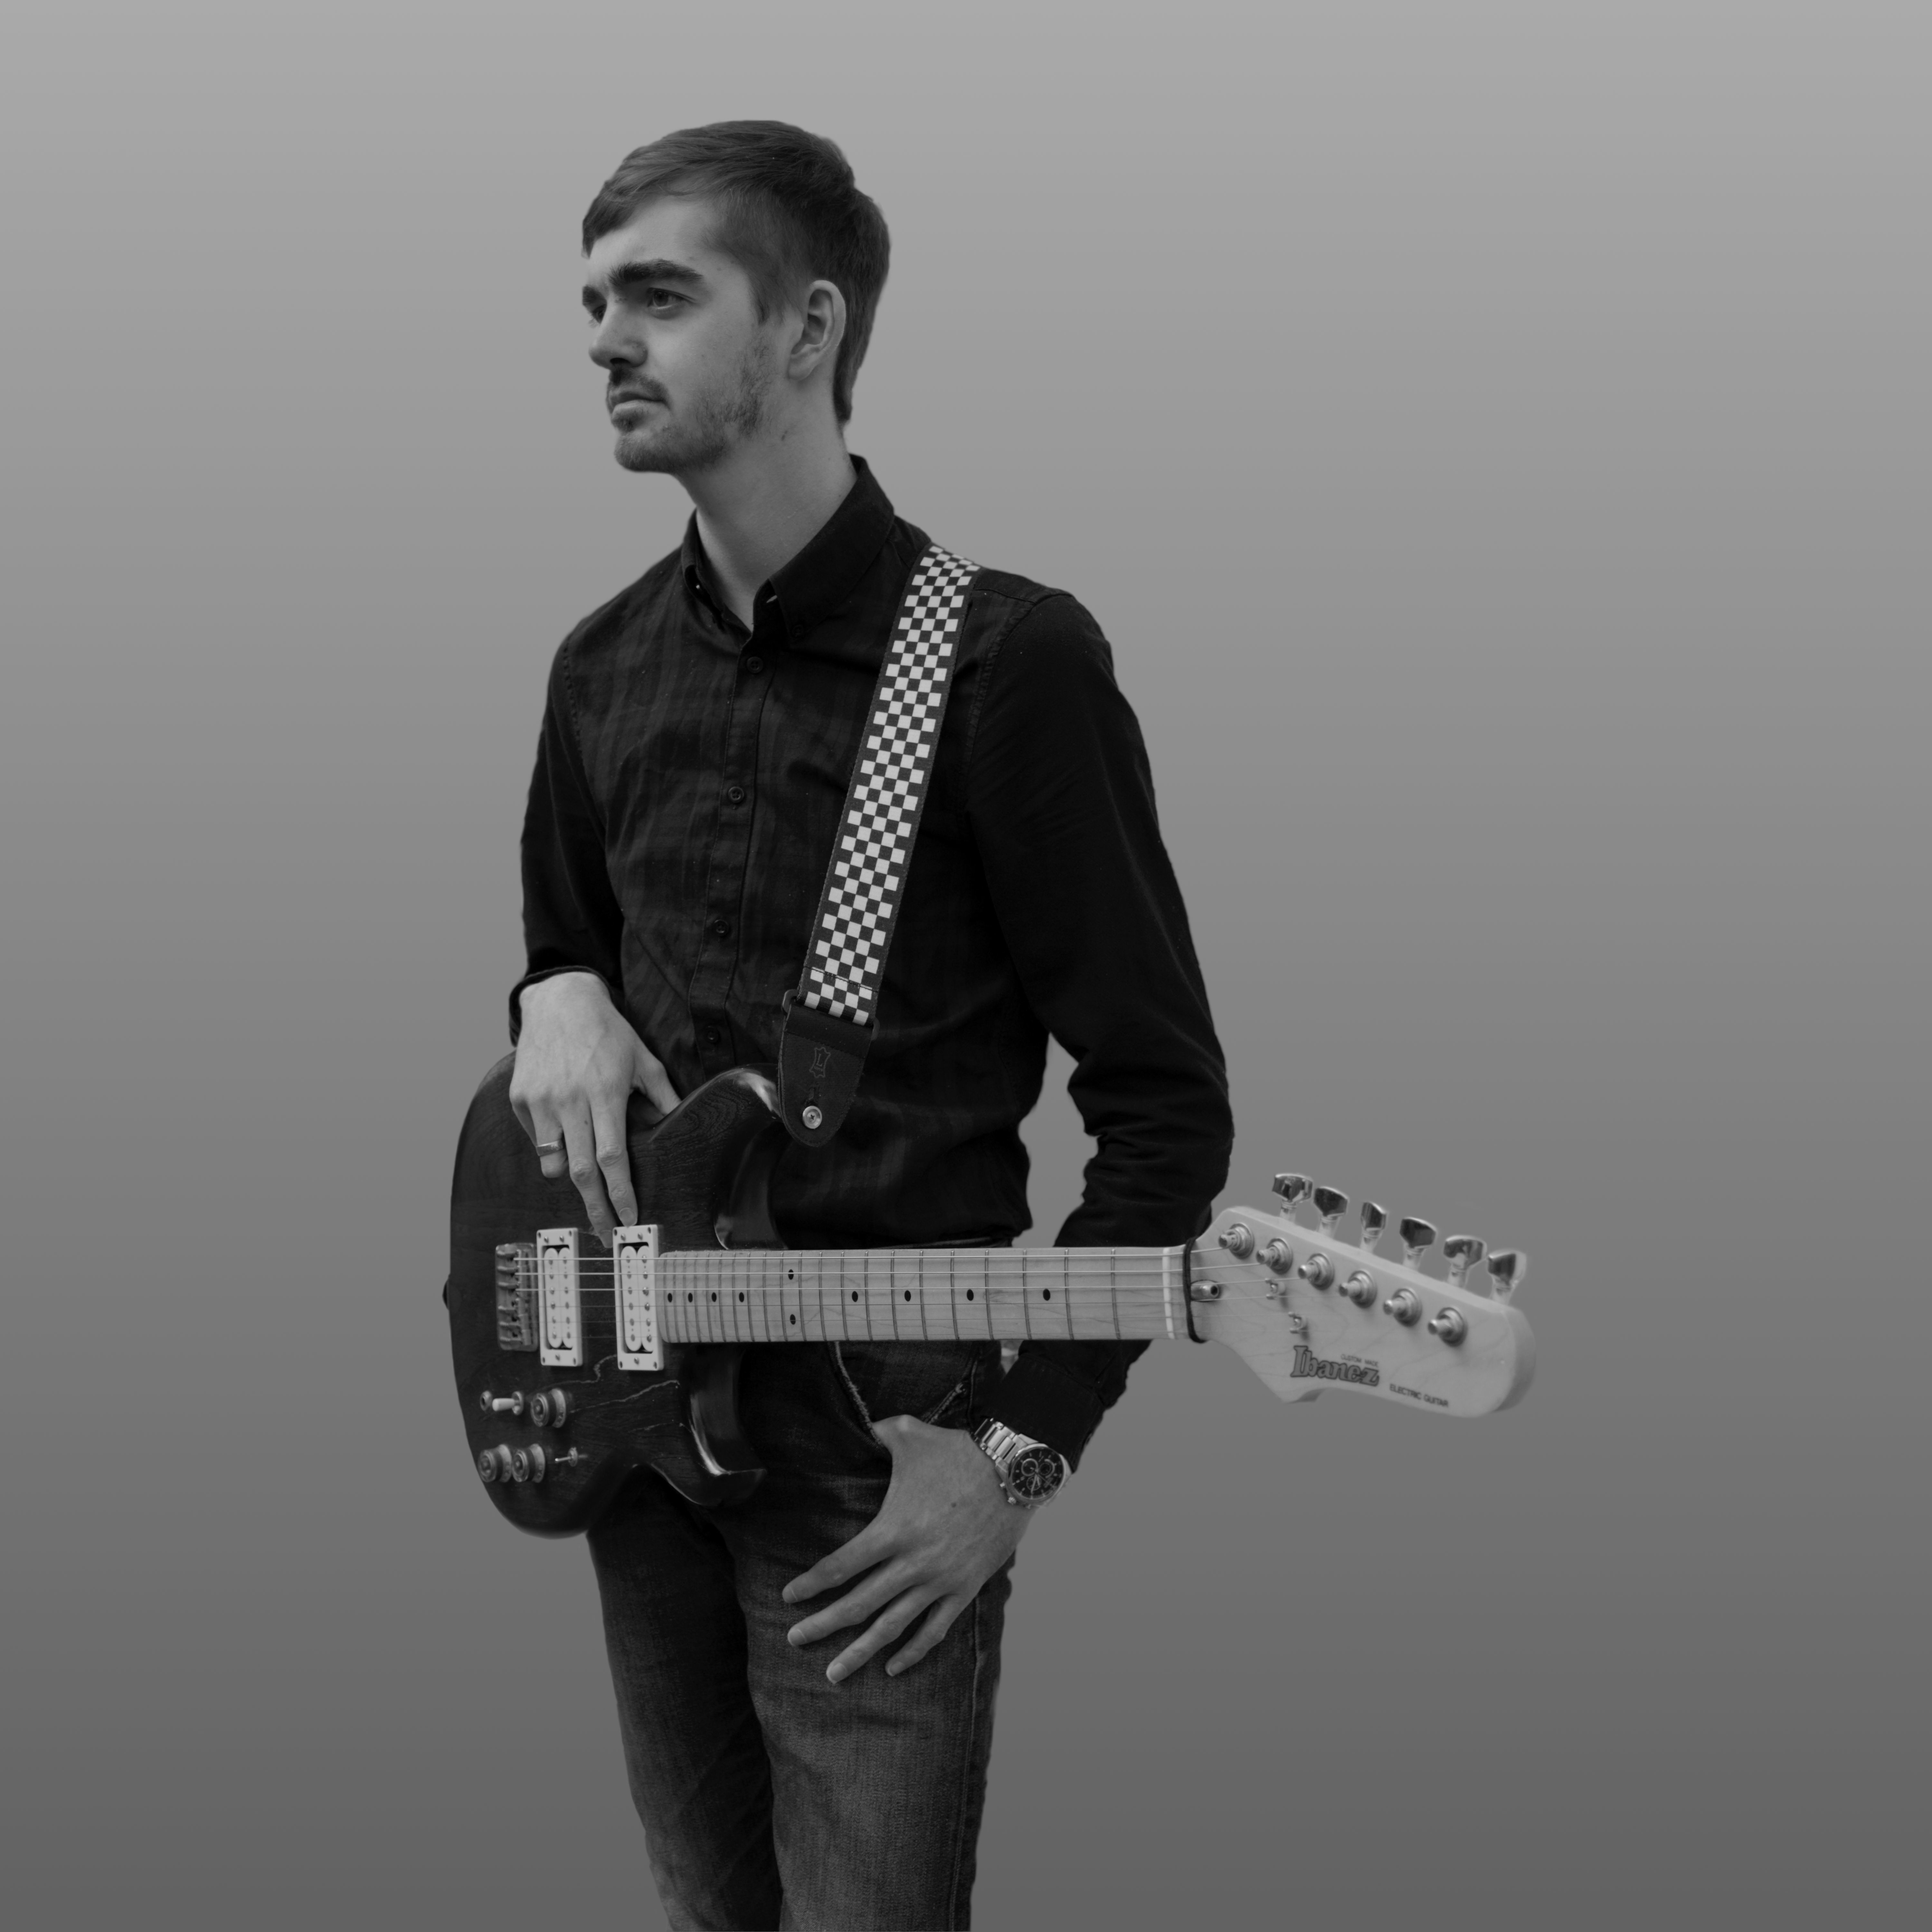 Black and white image of person with a guitar